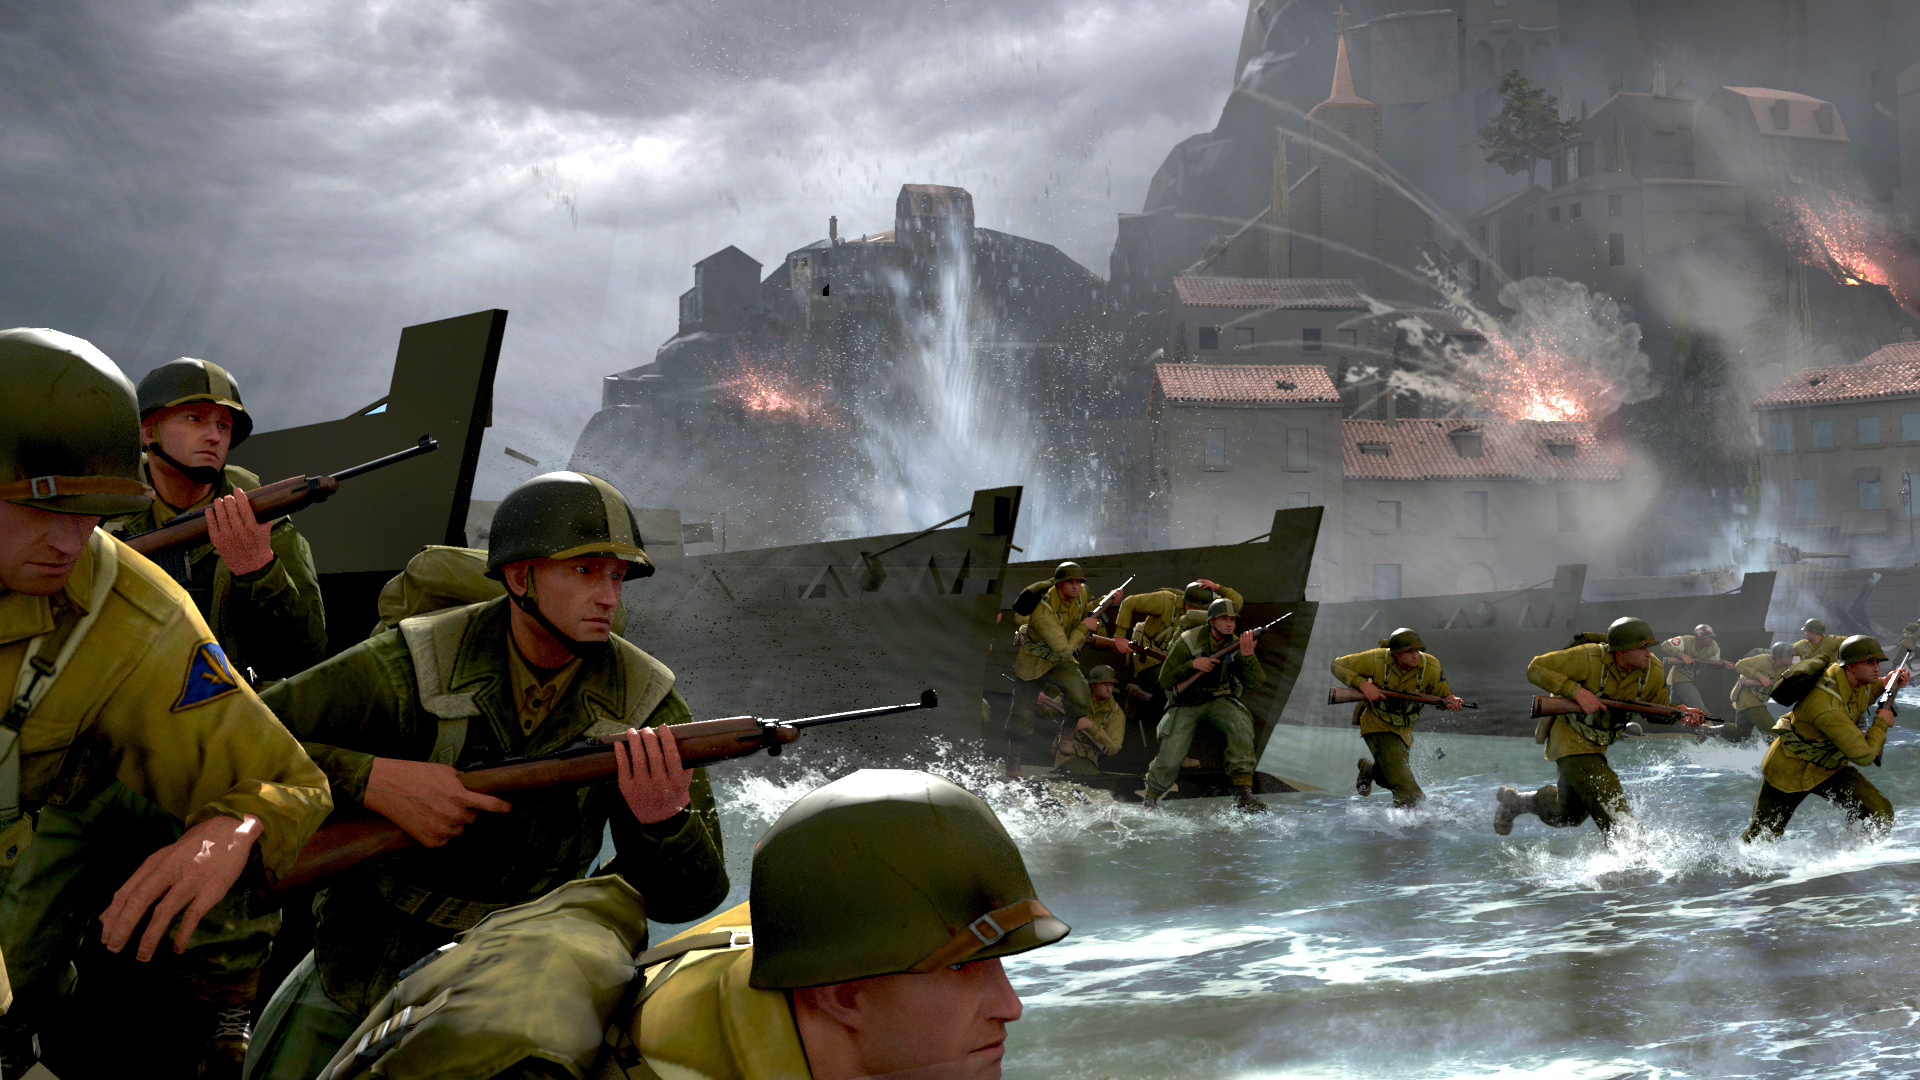 Company of Heroes 3: The playable fanctions including the British and Amercian forces. 1920x1080 Full HD Wallpaper.